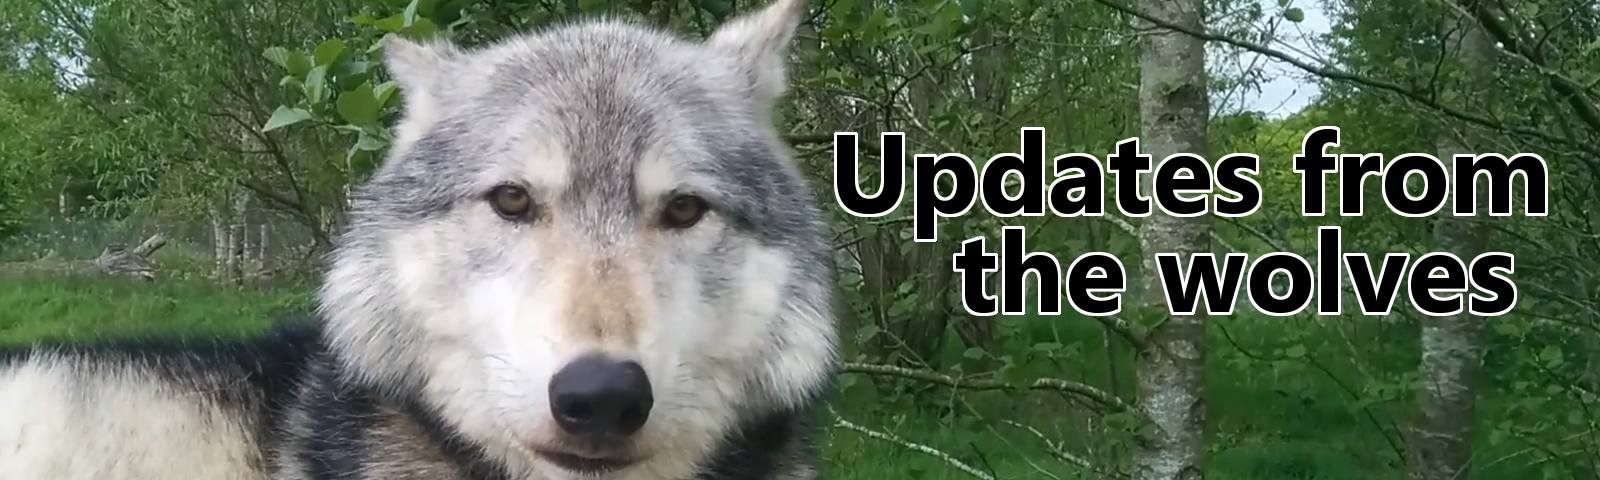 Updates from the wolves